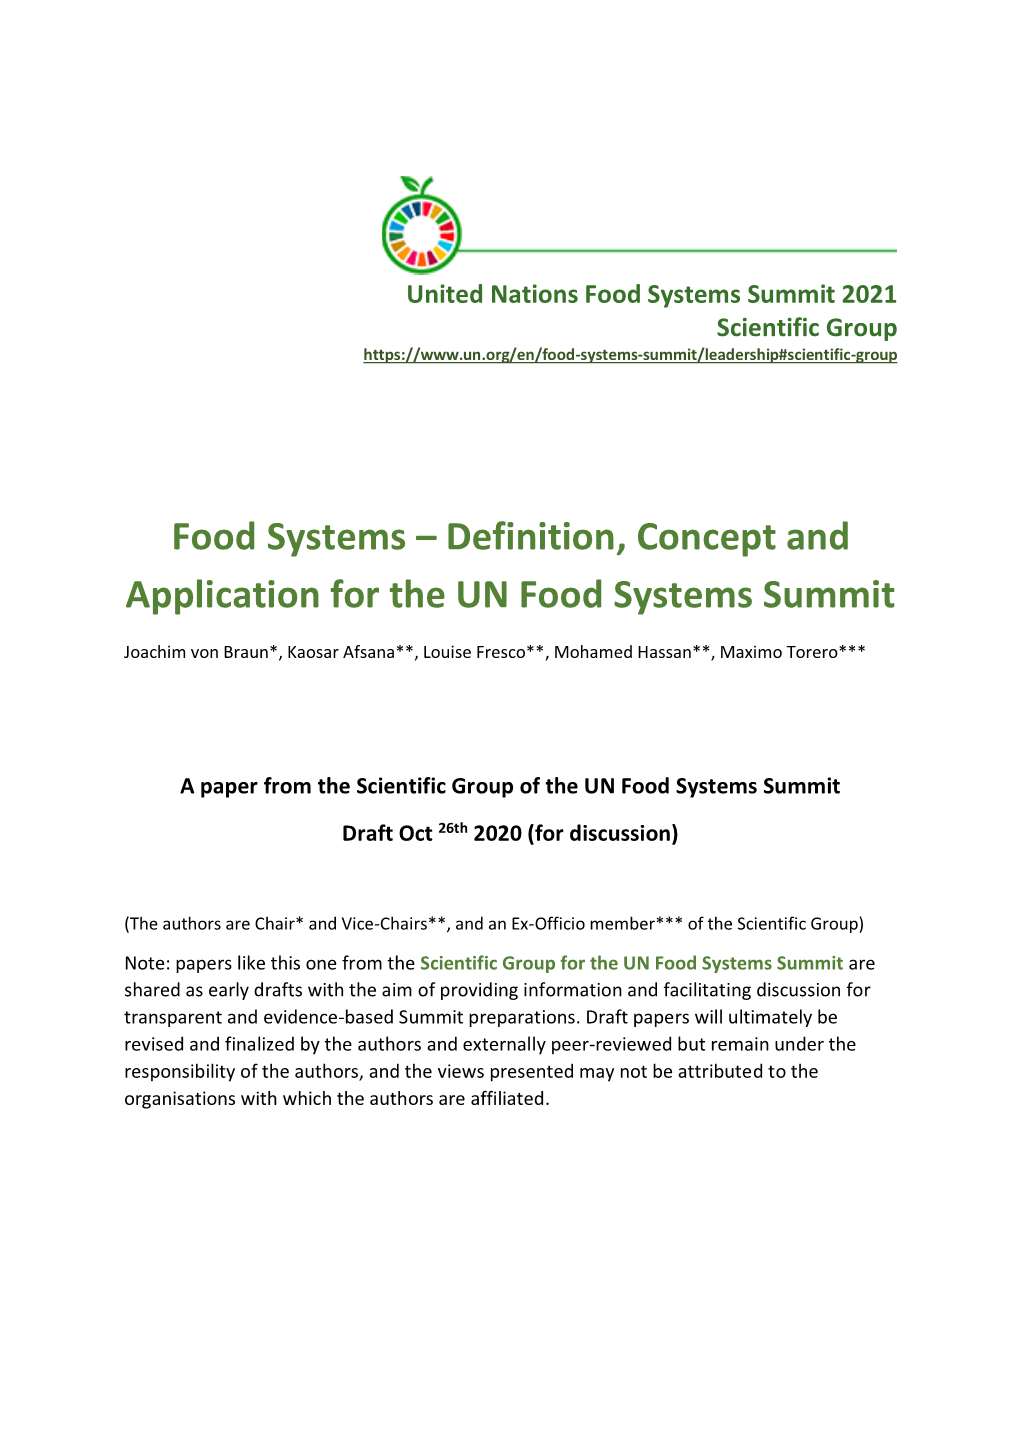 Definition, Concept and Application for the UN Food Systems Summit